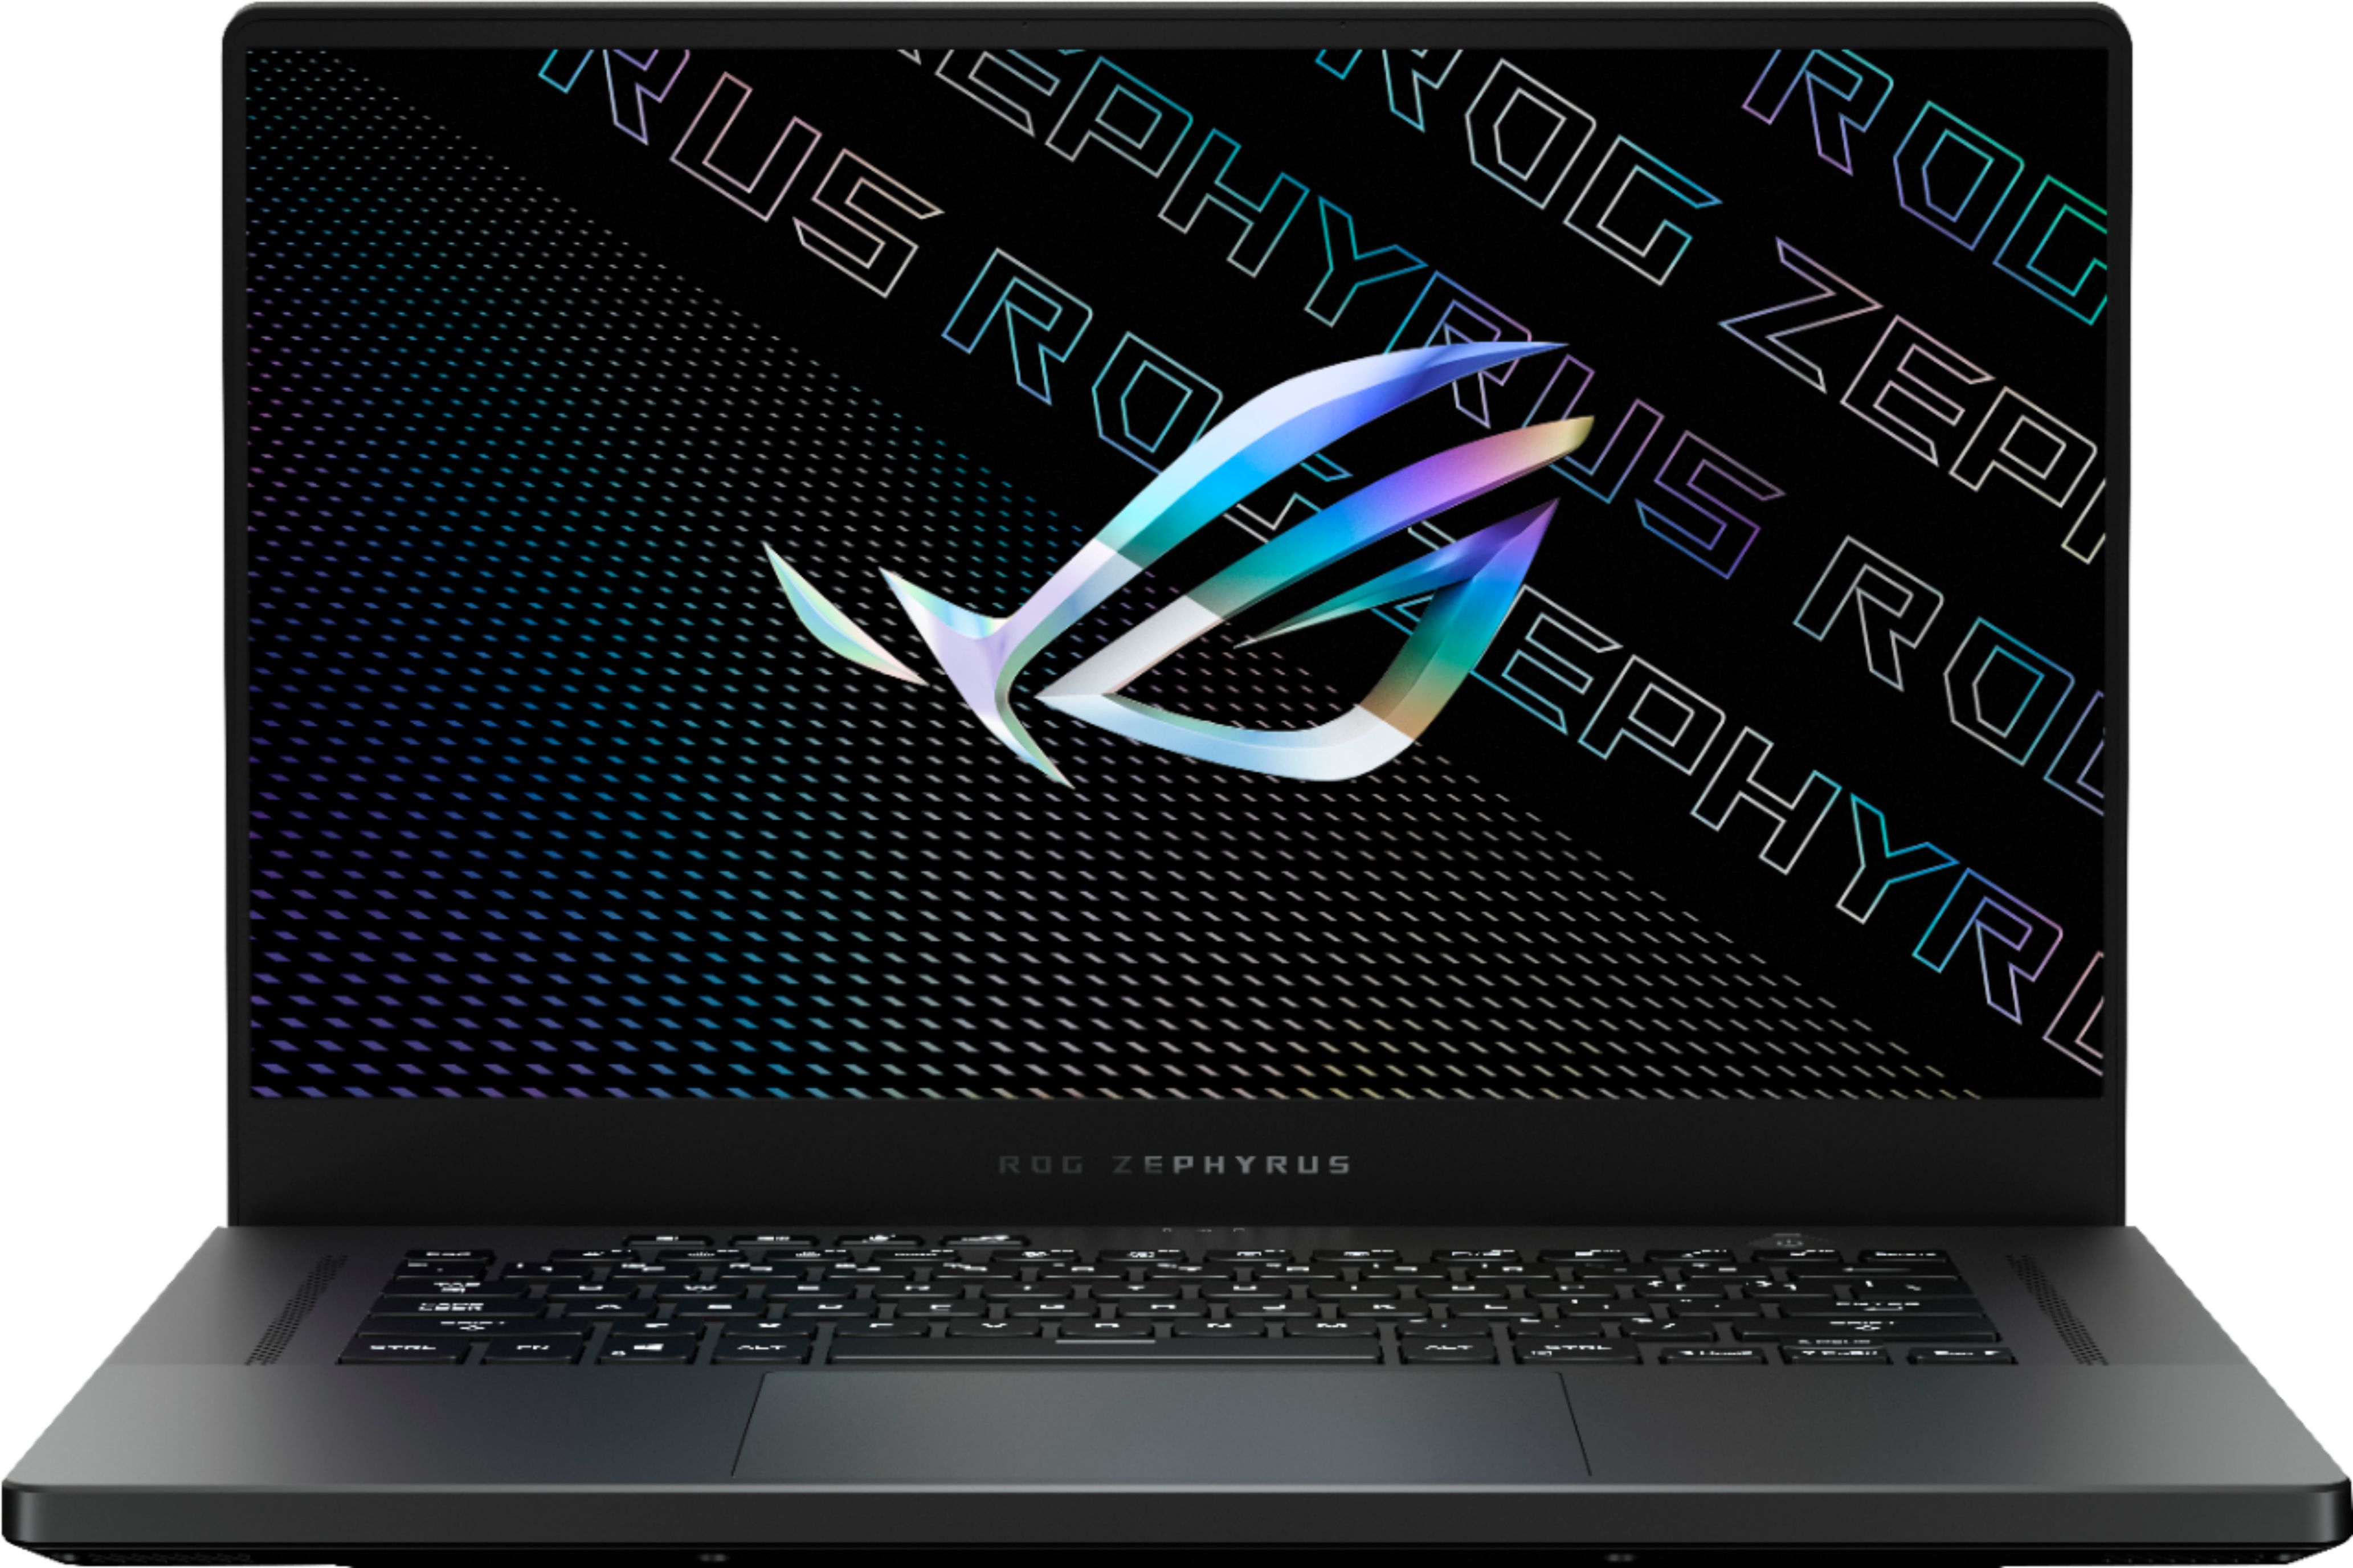 Open-Box Excellent ASUS - ROG Zephyrus 15.6" QHD Gaming Laptop - AMD Ryzen 9 - 16GB Memory - NVIDIA GeForce RTX 3070 - 1TB SSD - Eclipse Grey - Eclipse Grey $1169